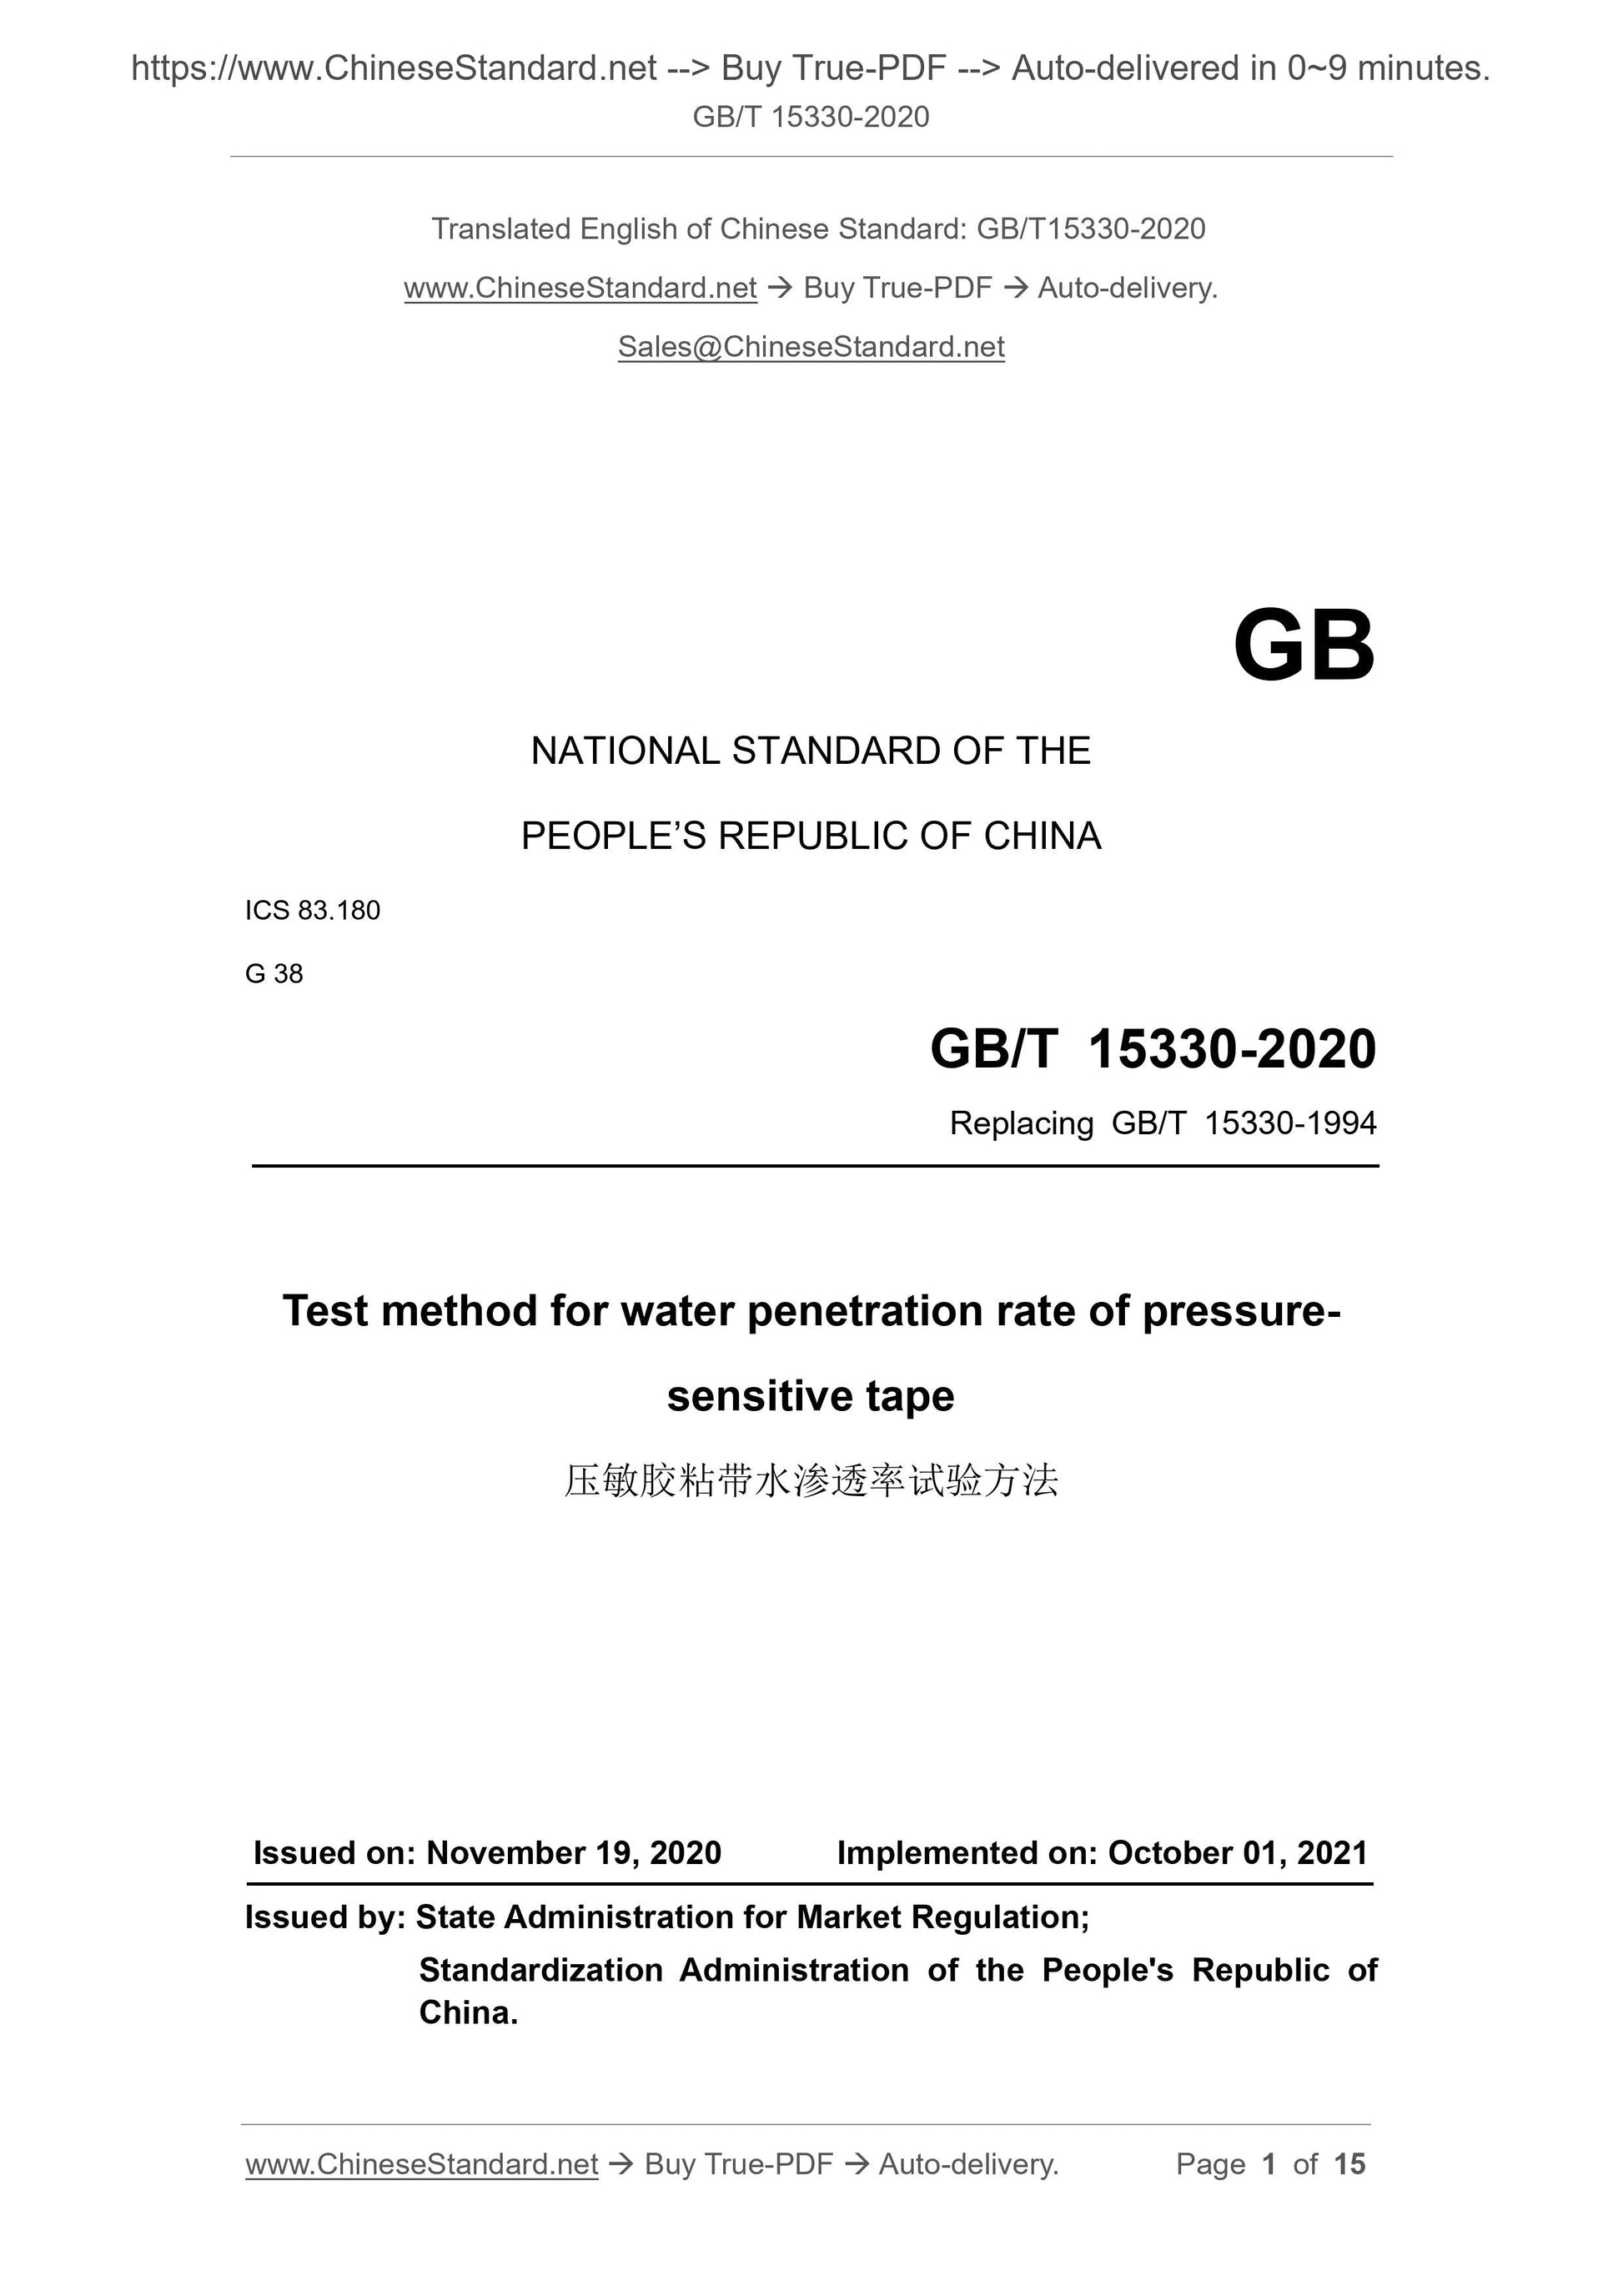 GB/T 15330-2020 Page 1